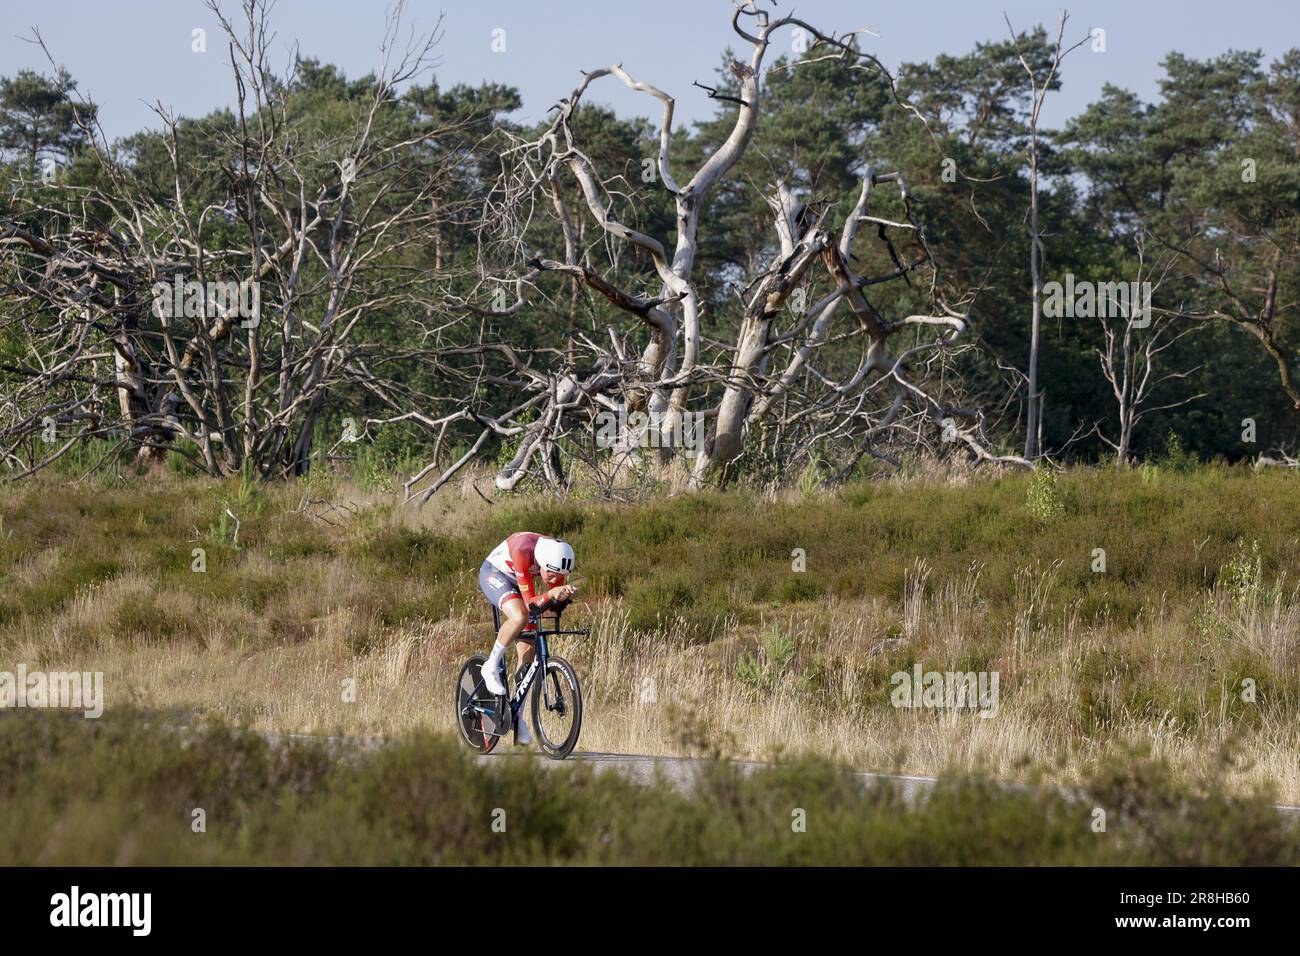 ELSPEET - Cyclist Daan Hoole during the Dutch time trial championship. The riders rode two laps of approximately 20 kilometers between the meadows and forest paths of the Veluwe. ANP BAS CZERWINSKI Stock Photo